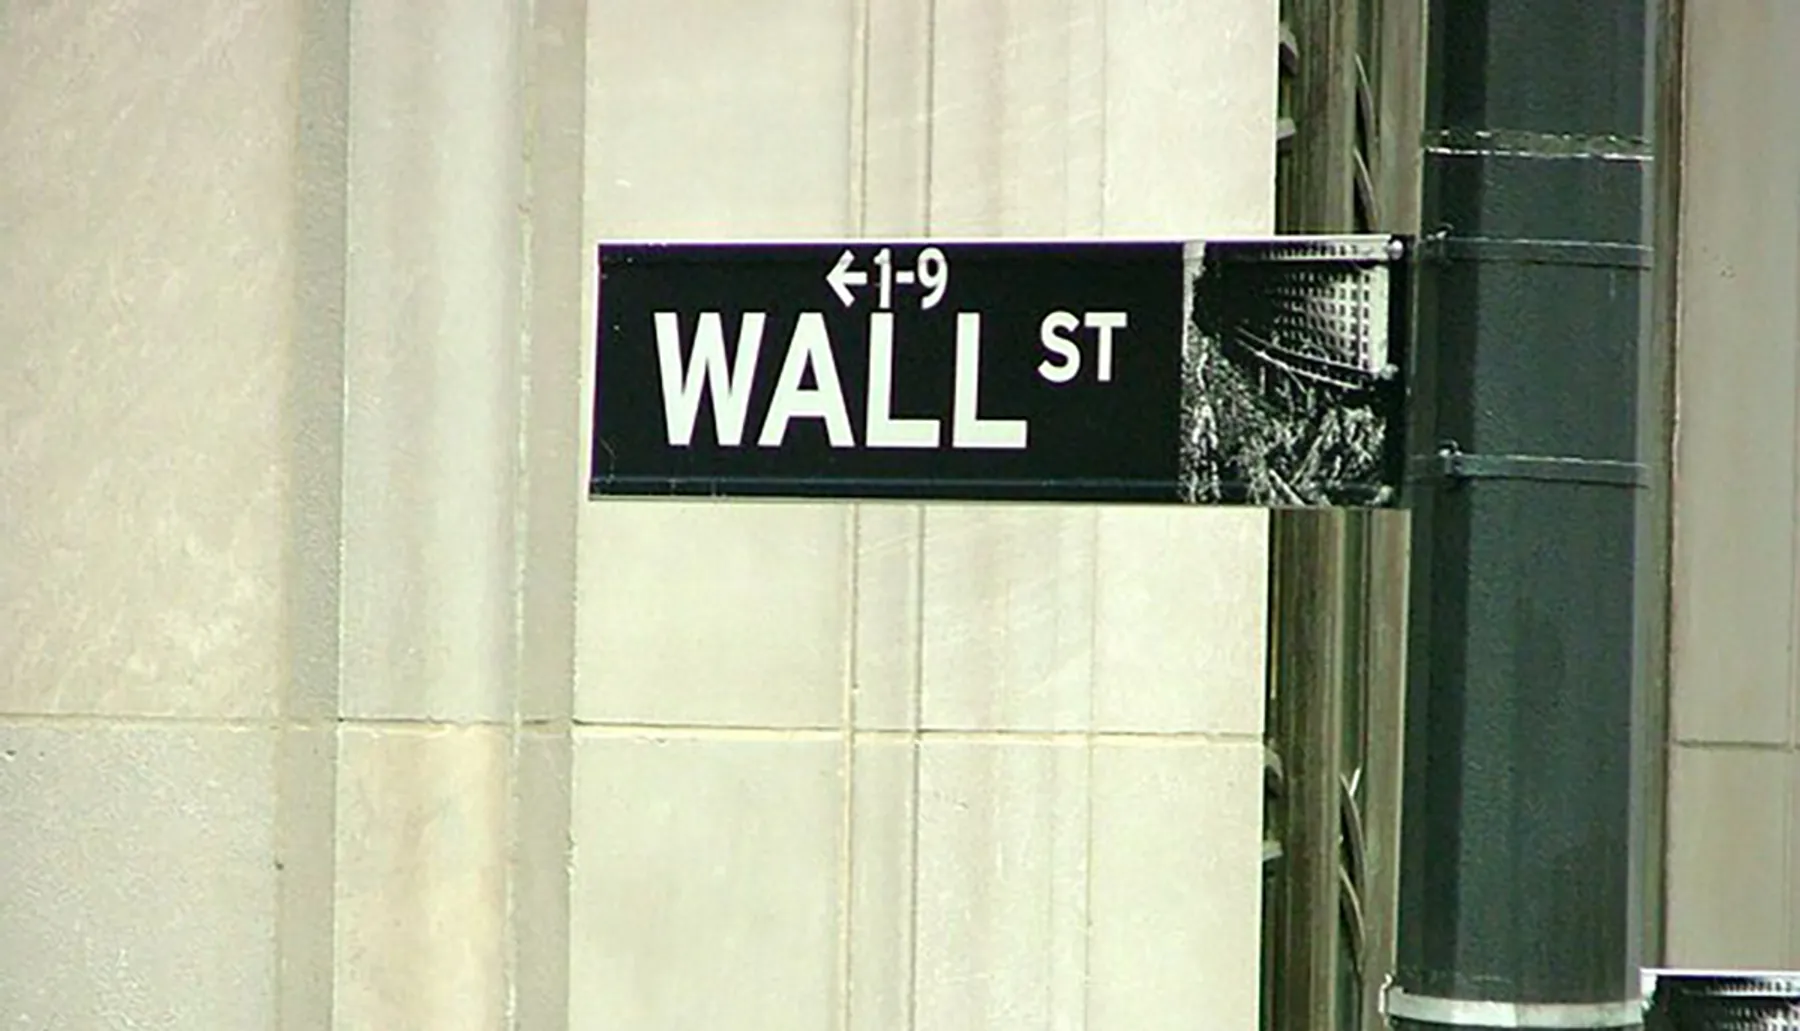 The image shows a street sign for Wall Street with an arrow indicating street numbers 1-9 to the left.